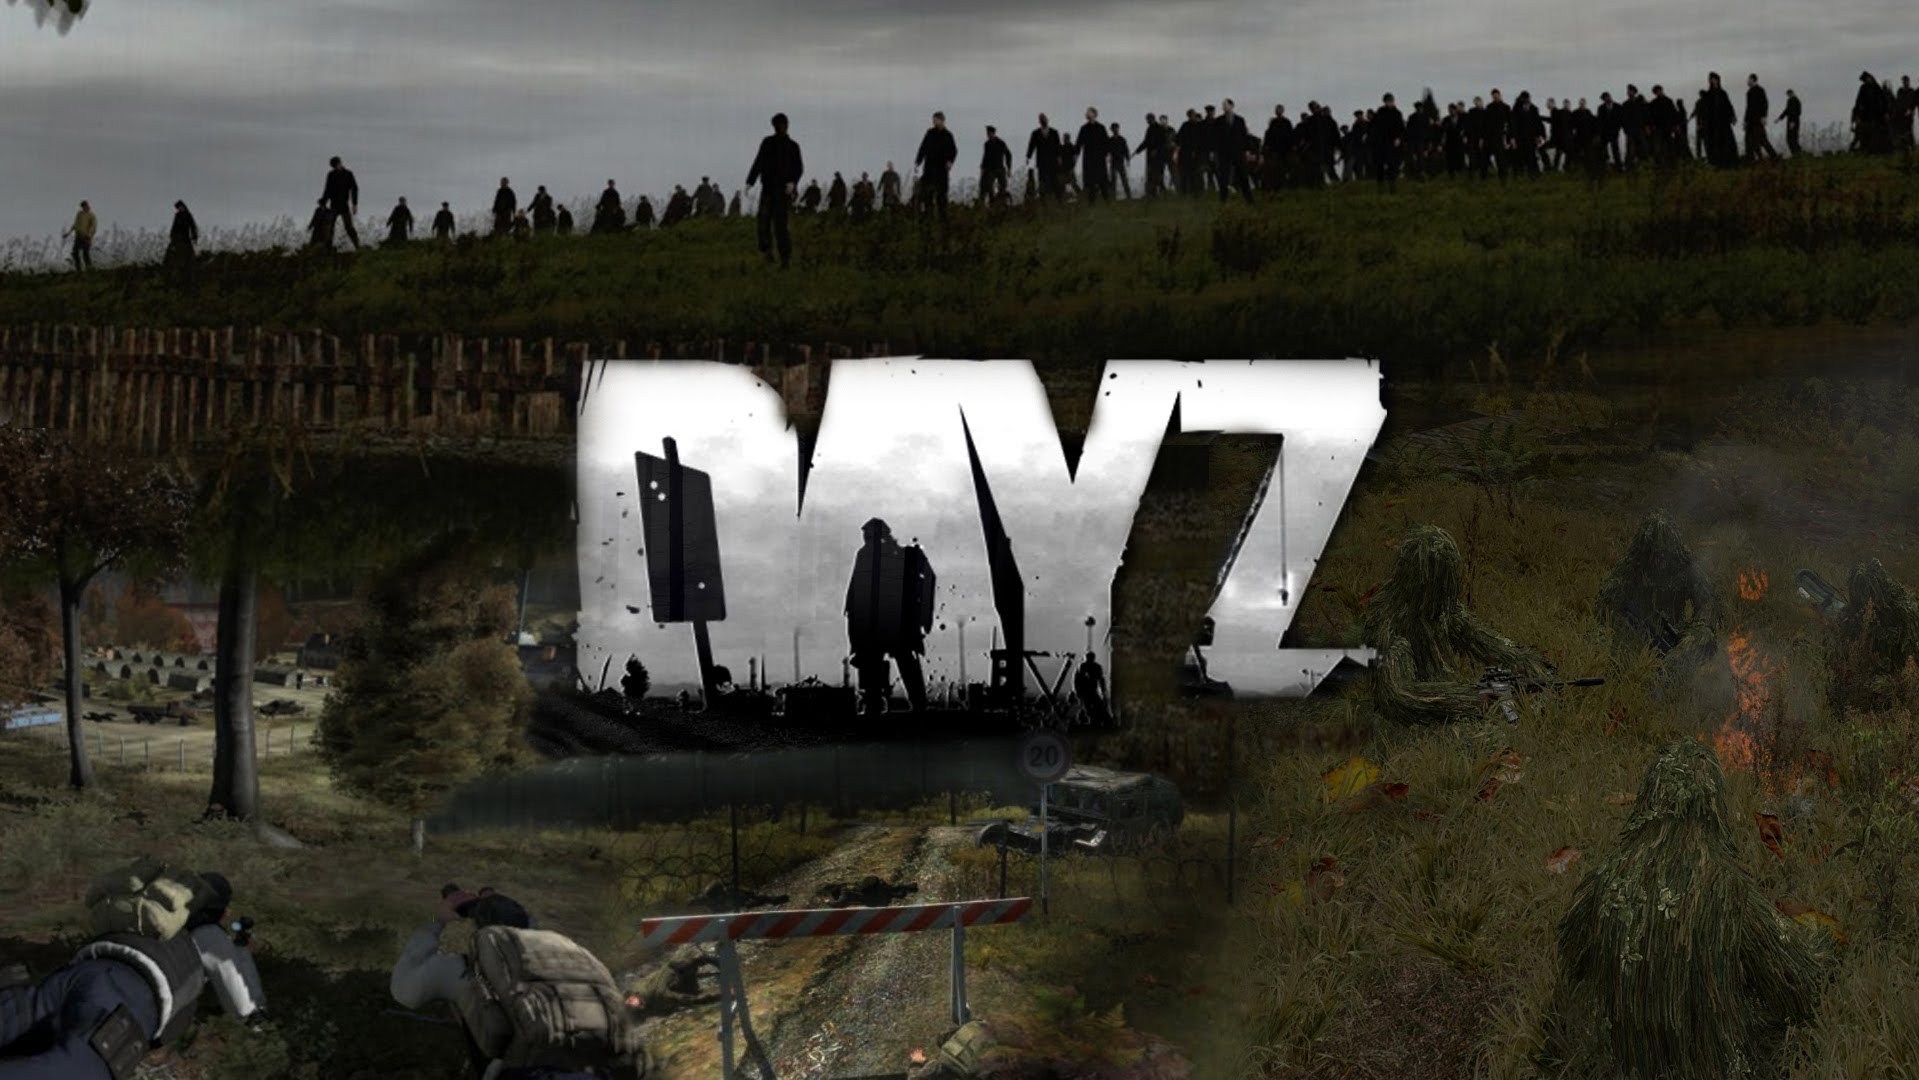 https://gamingbolt.com/dayz-appears-on-xbox-store-4k-uhd-support-reiterated-for-xbox-one-x